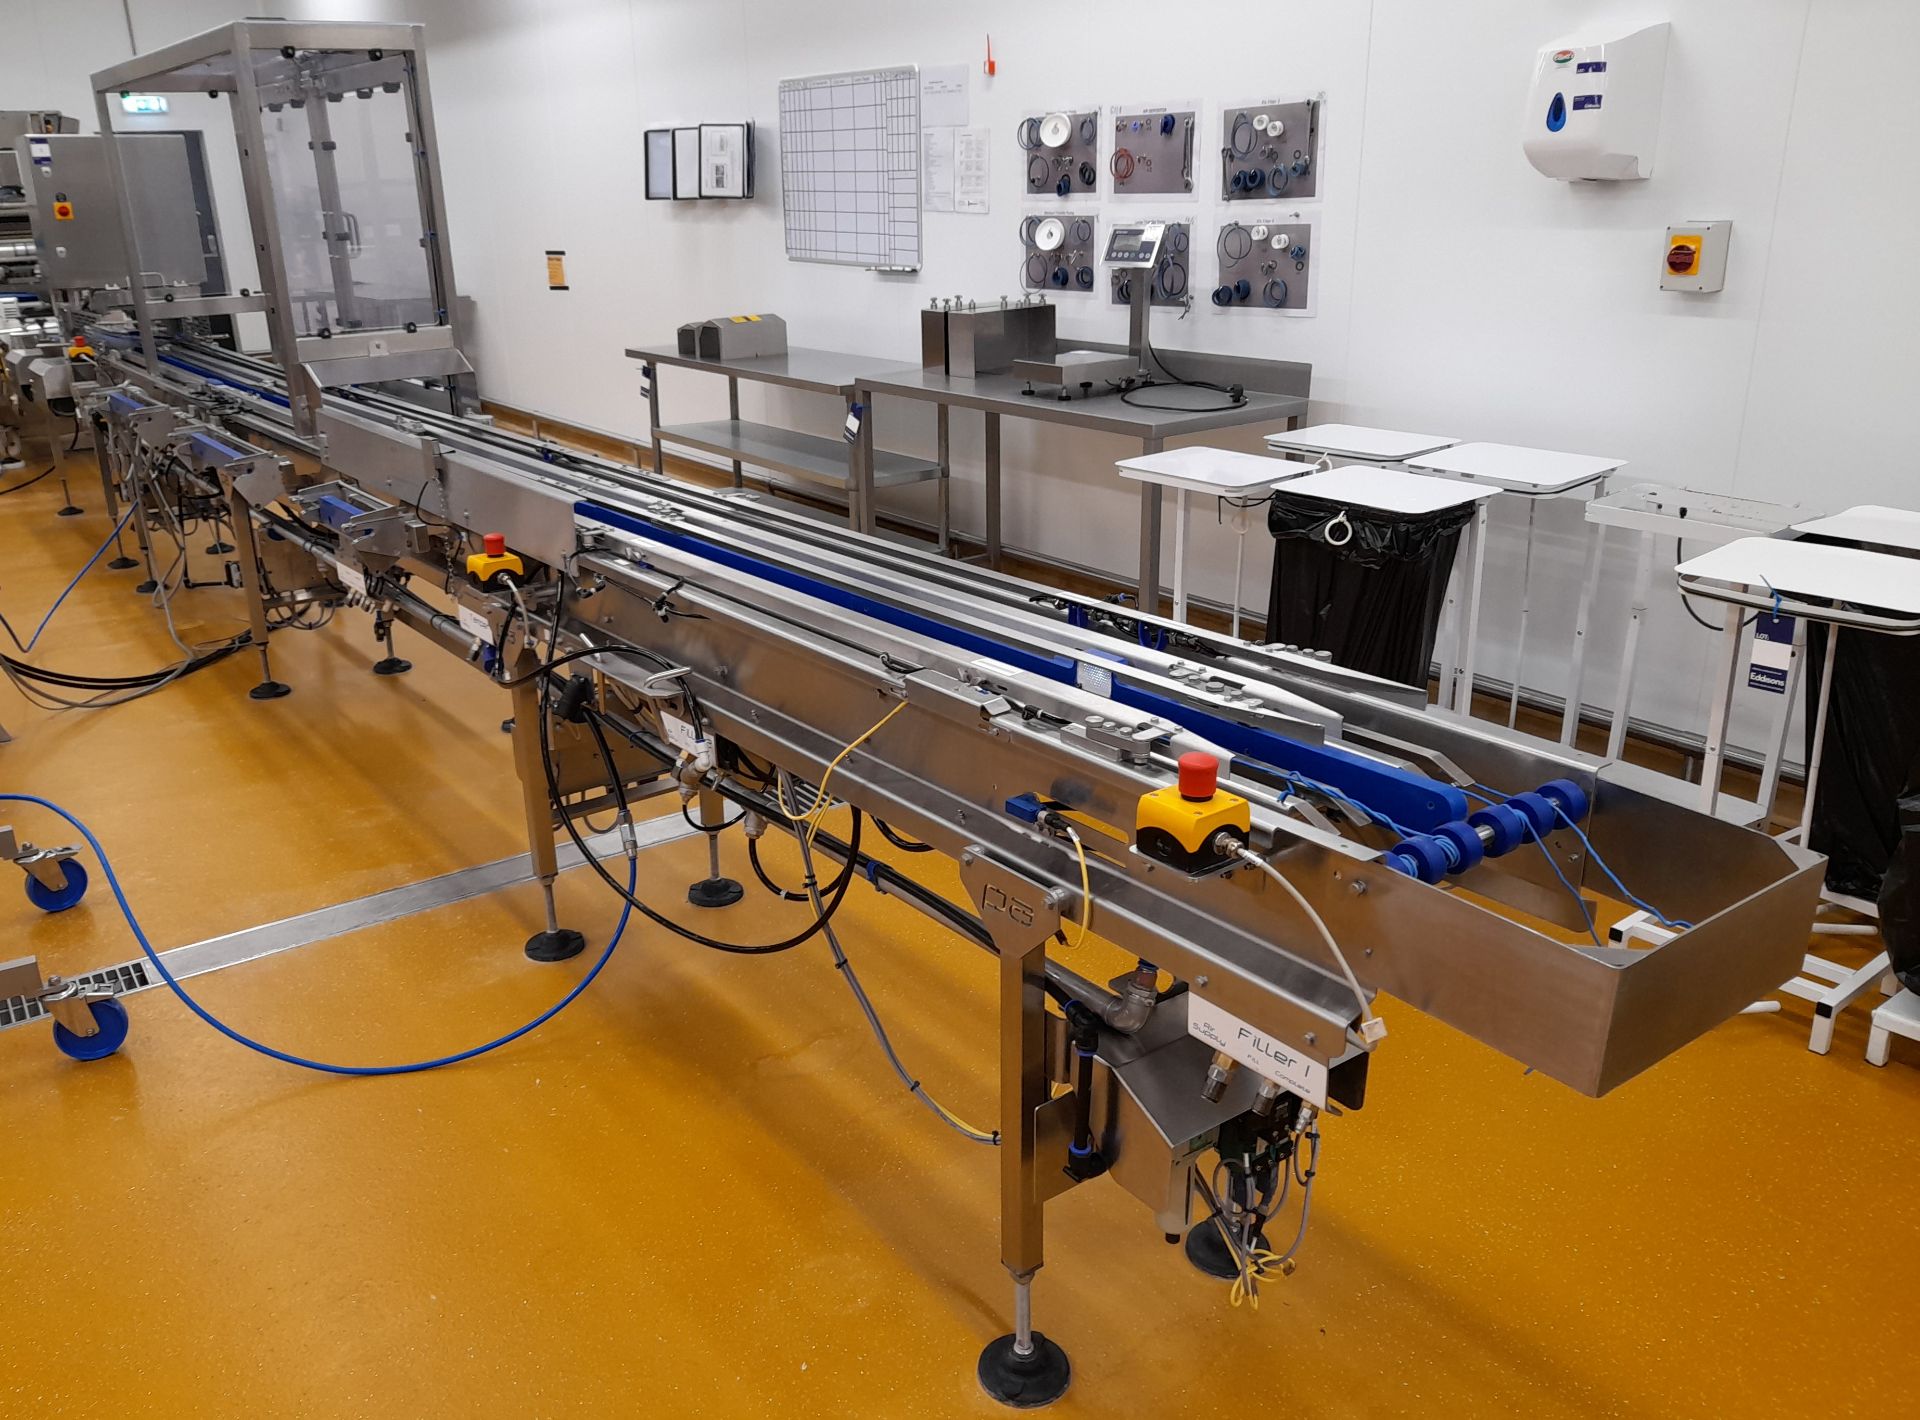 Packaging Automation Twin Lane Packaging Conveyor Line, Serial number 00178 (2020) with Control